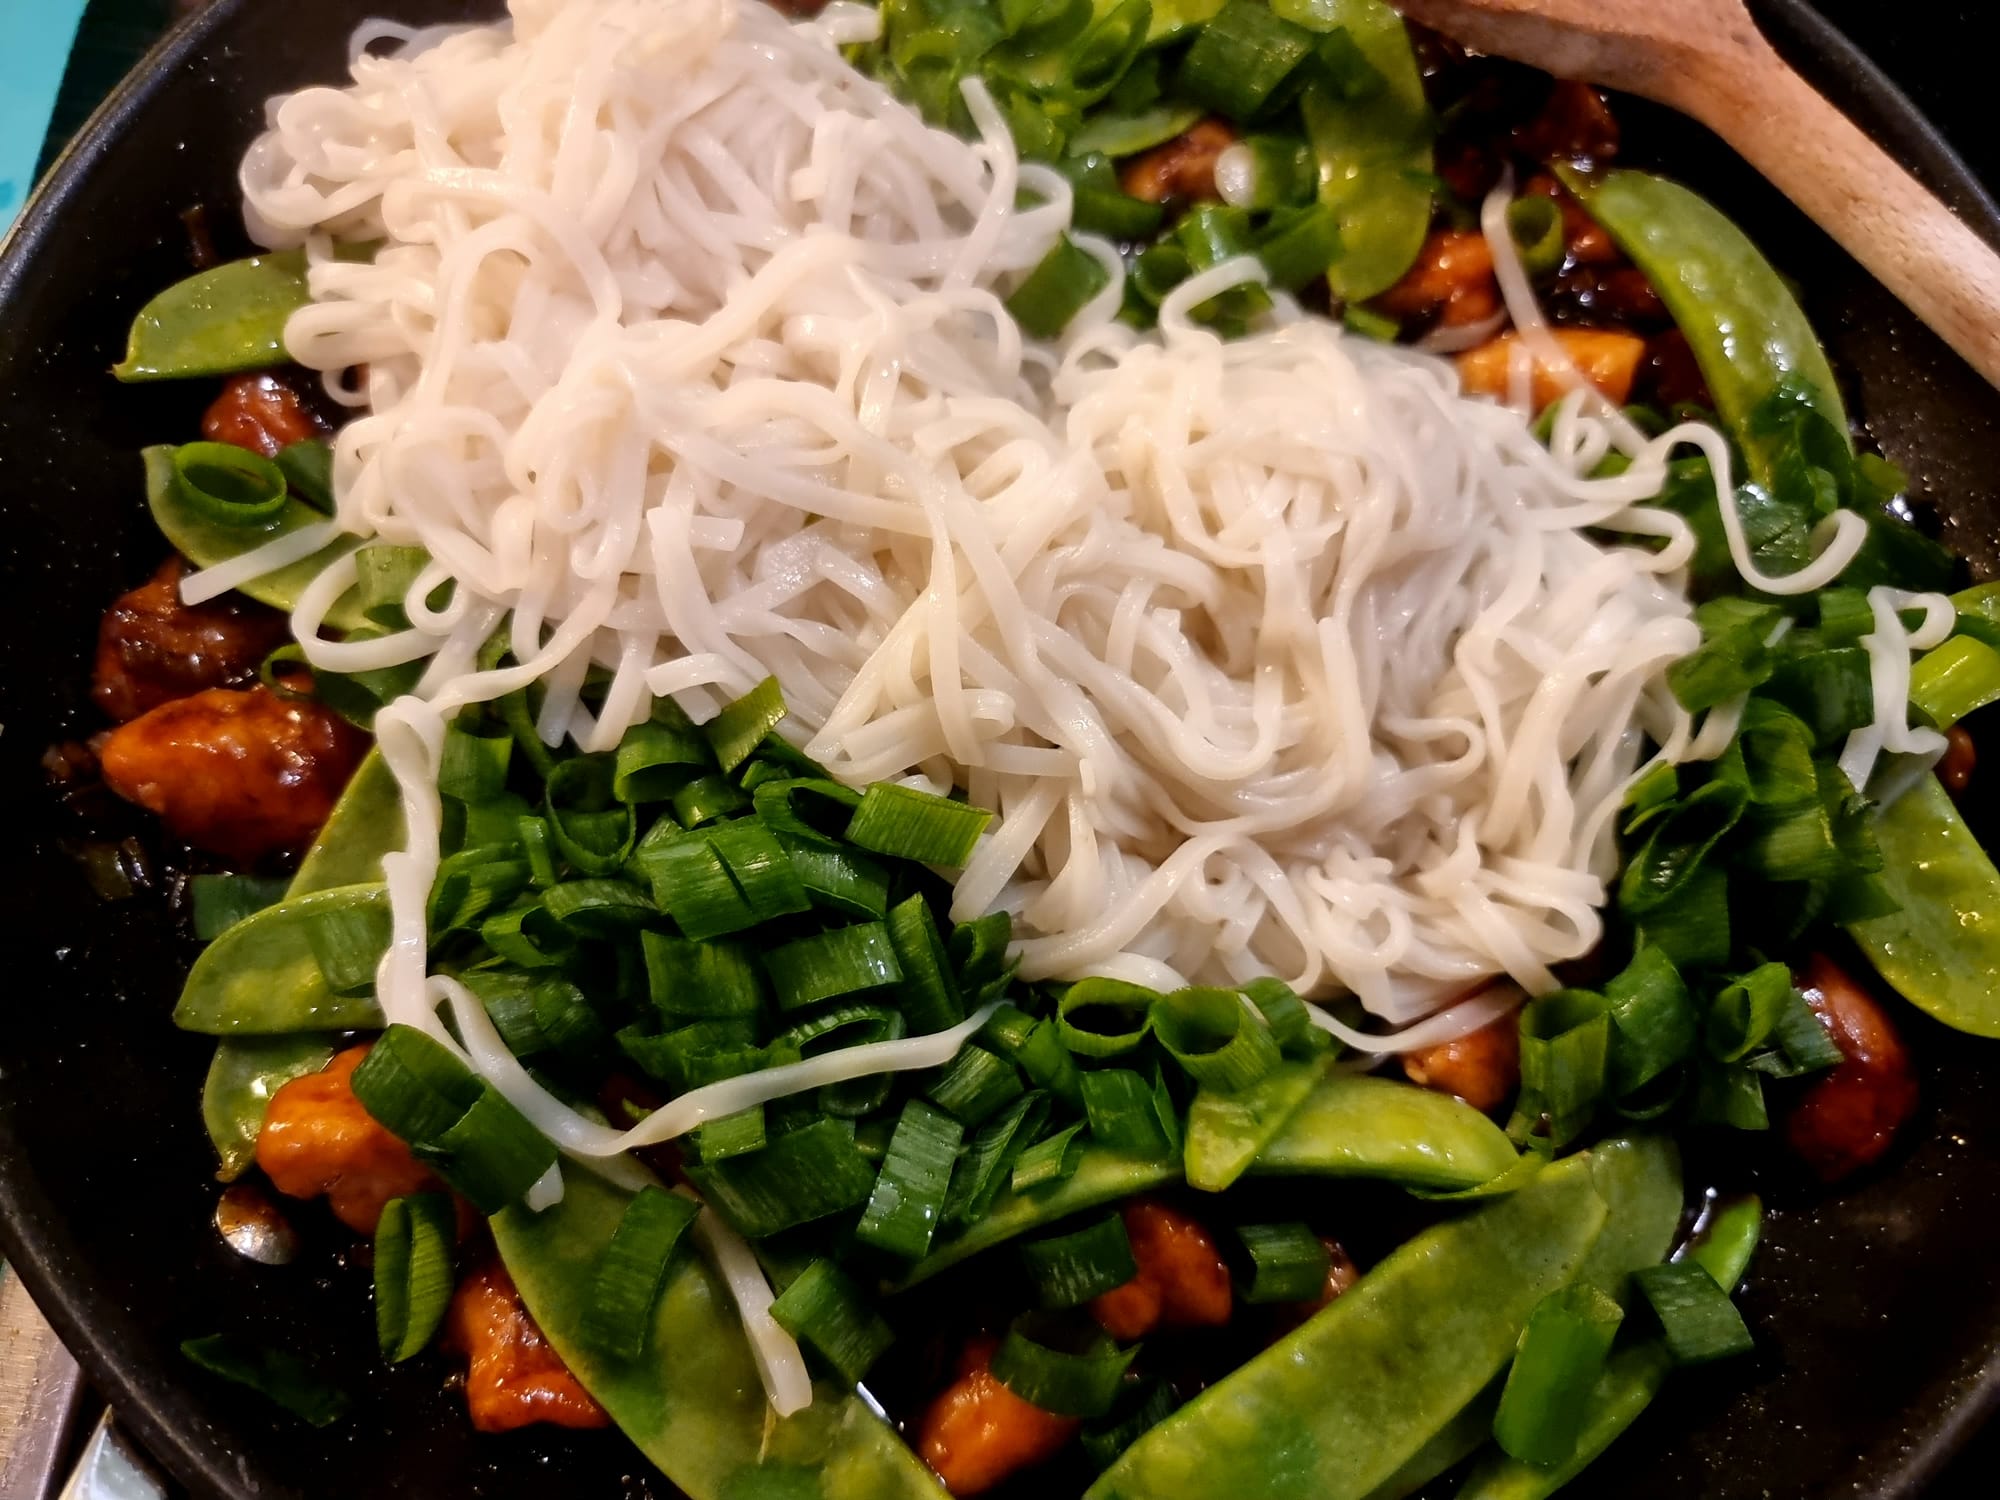 A pan filled with hoisin chicken, green vegetables and a good helping of noodles.